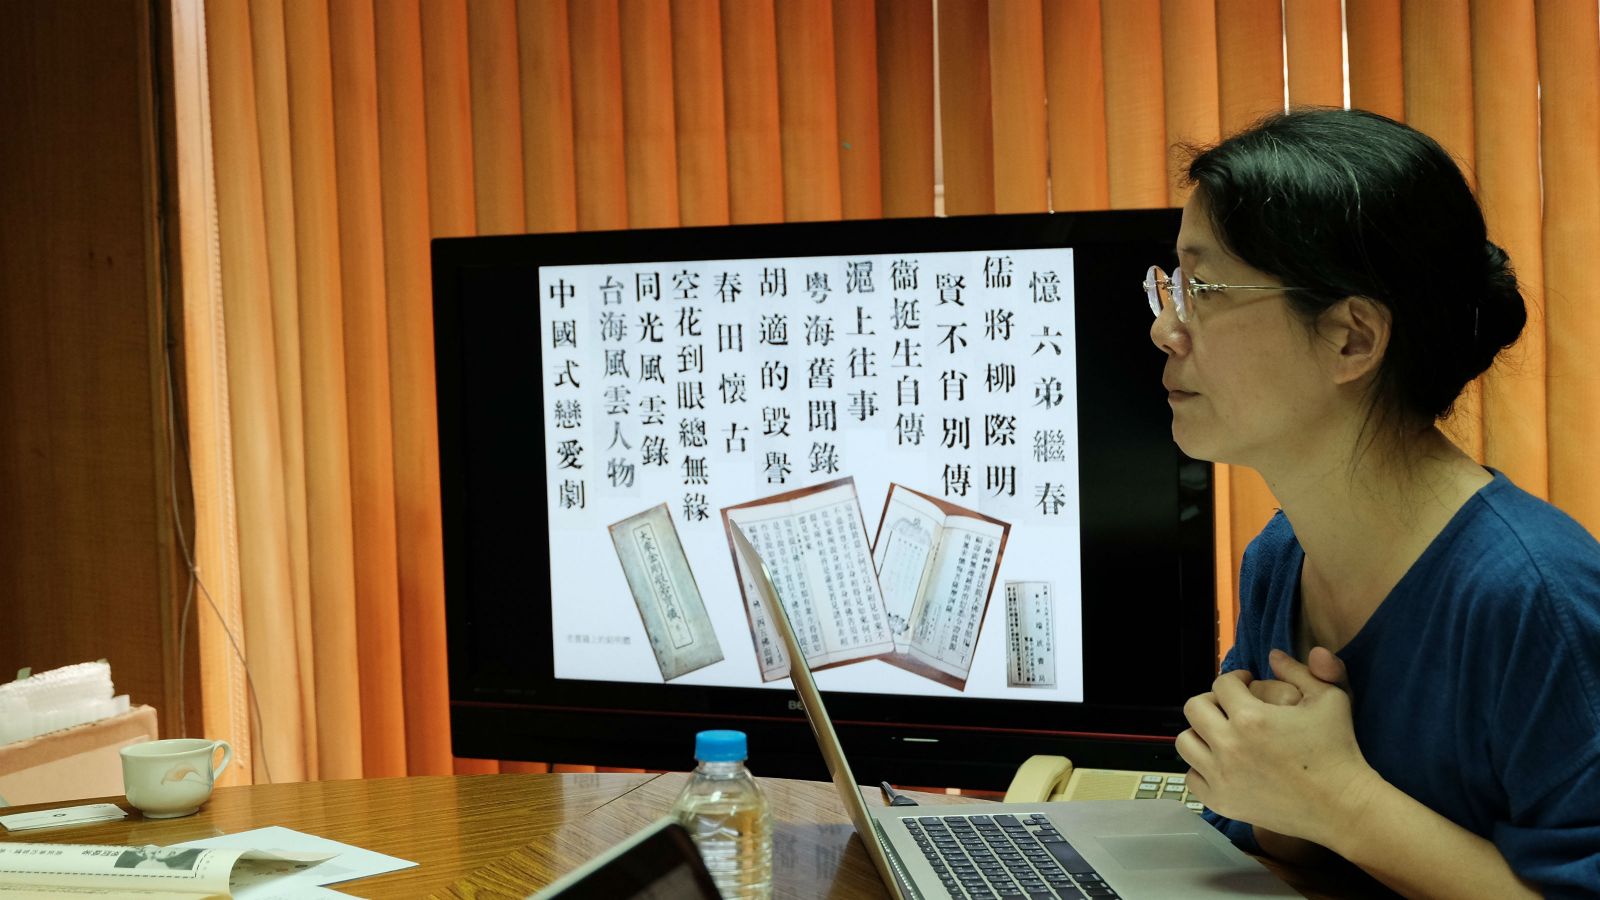 Chen Xiu-Mei (陳秀美), director of A Zhi-Bao studio (阿之寶) presents her findings on Taiwanese metal typefaces